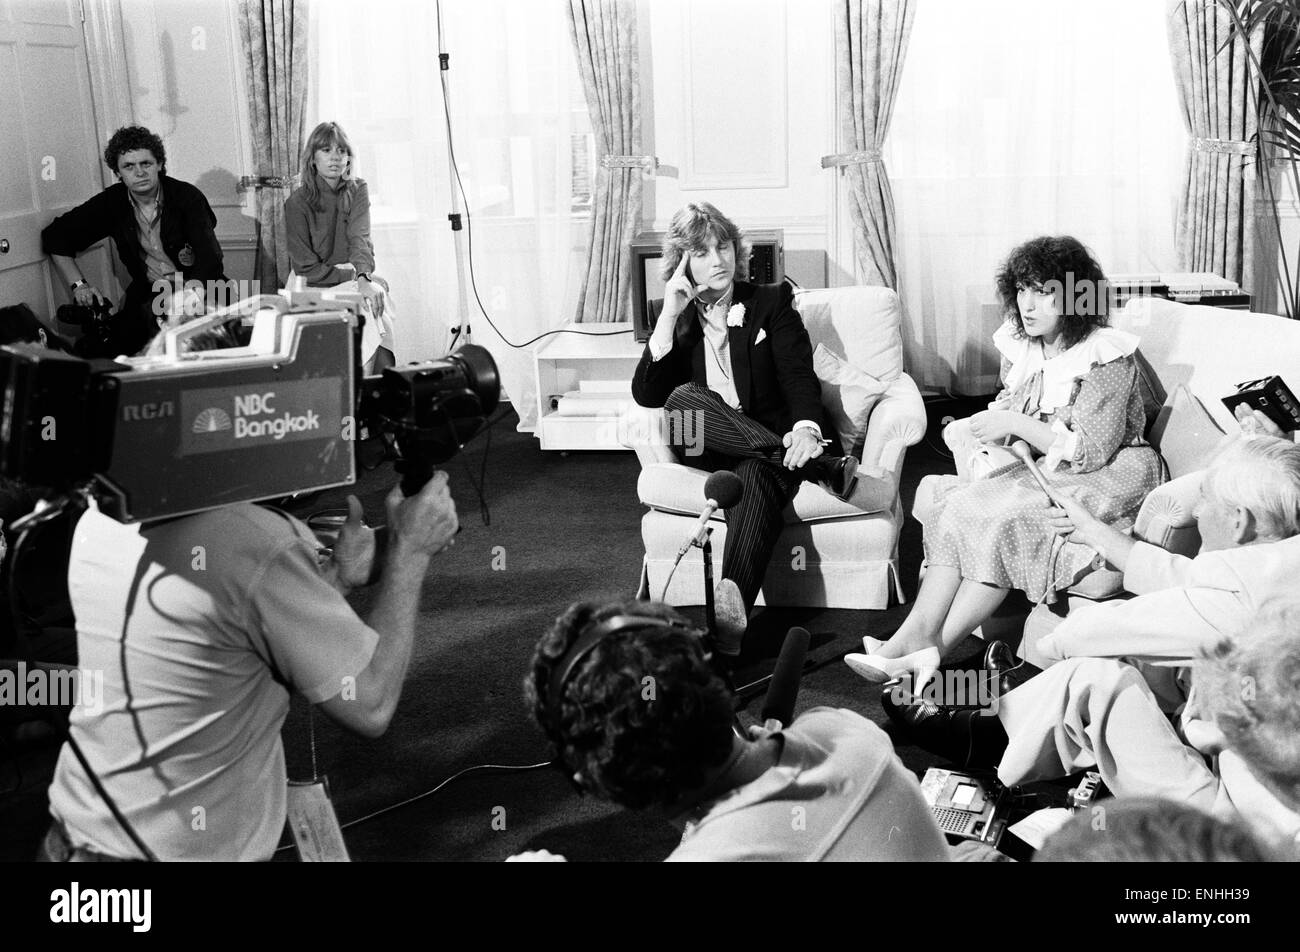 Wedding day of Prince Charles & Lady Diana Spencer, 29th July 1981. Pictured: Wedding dress designers David & Elizabeth Emanuel are interviewed by the International Press. Stock Photo